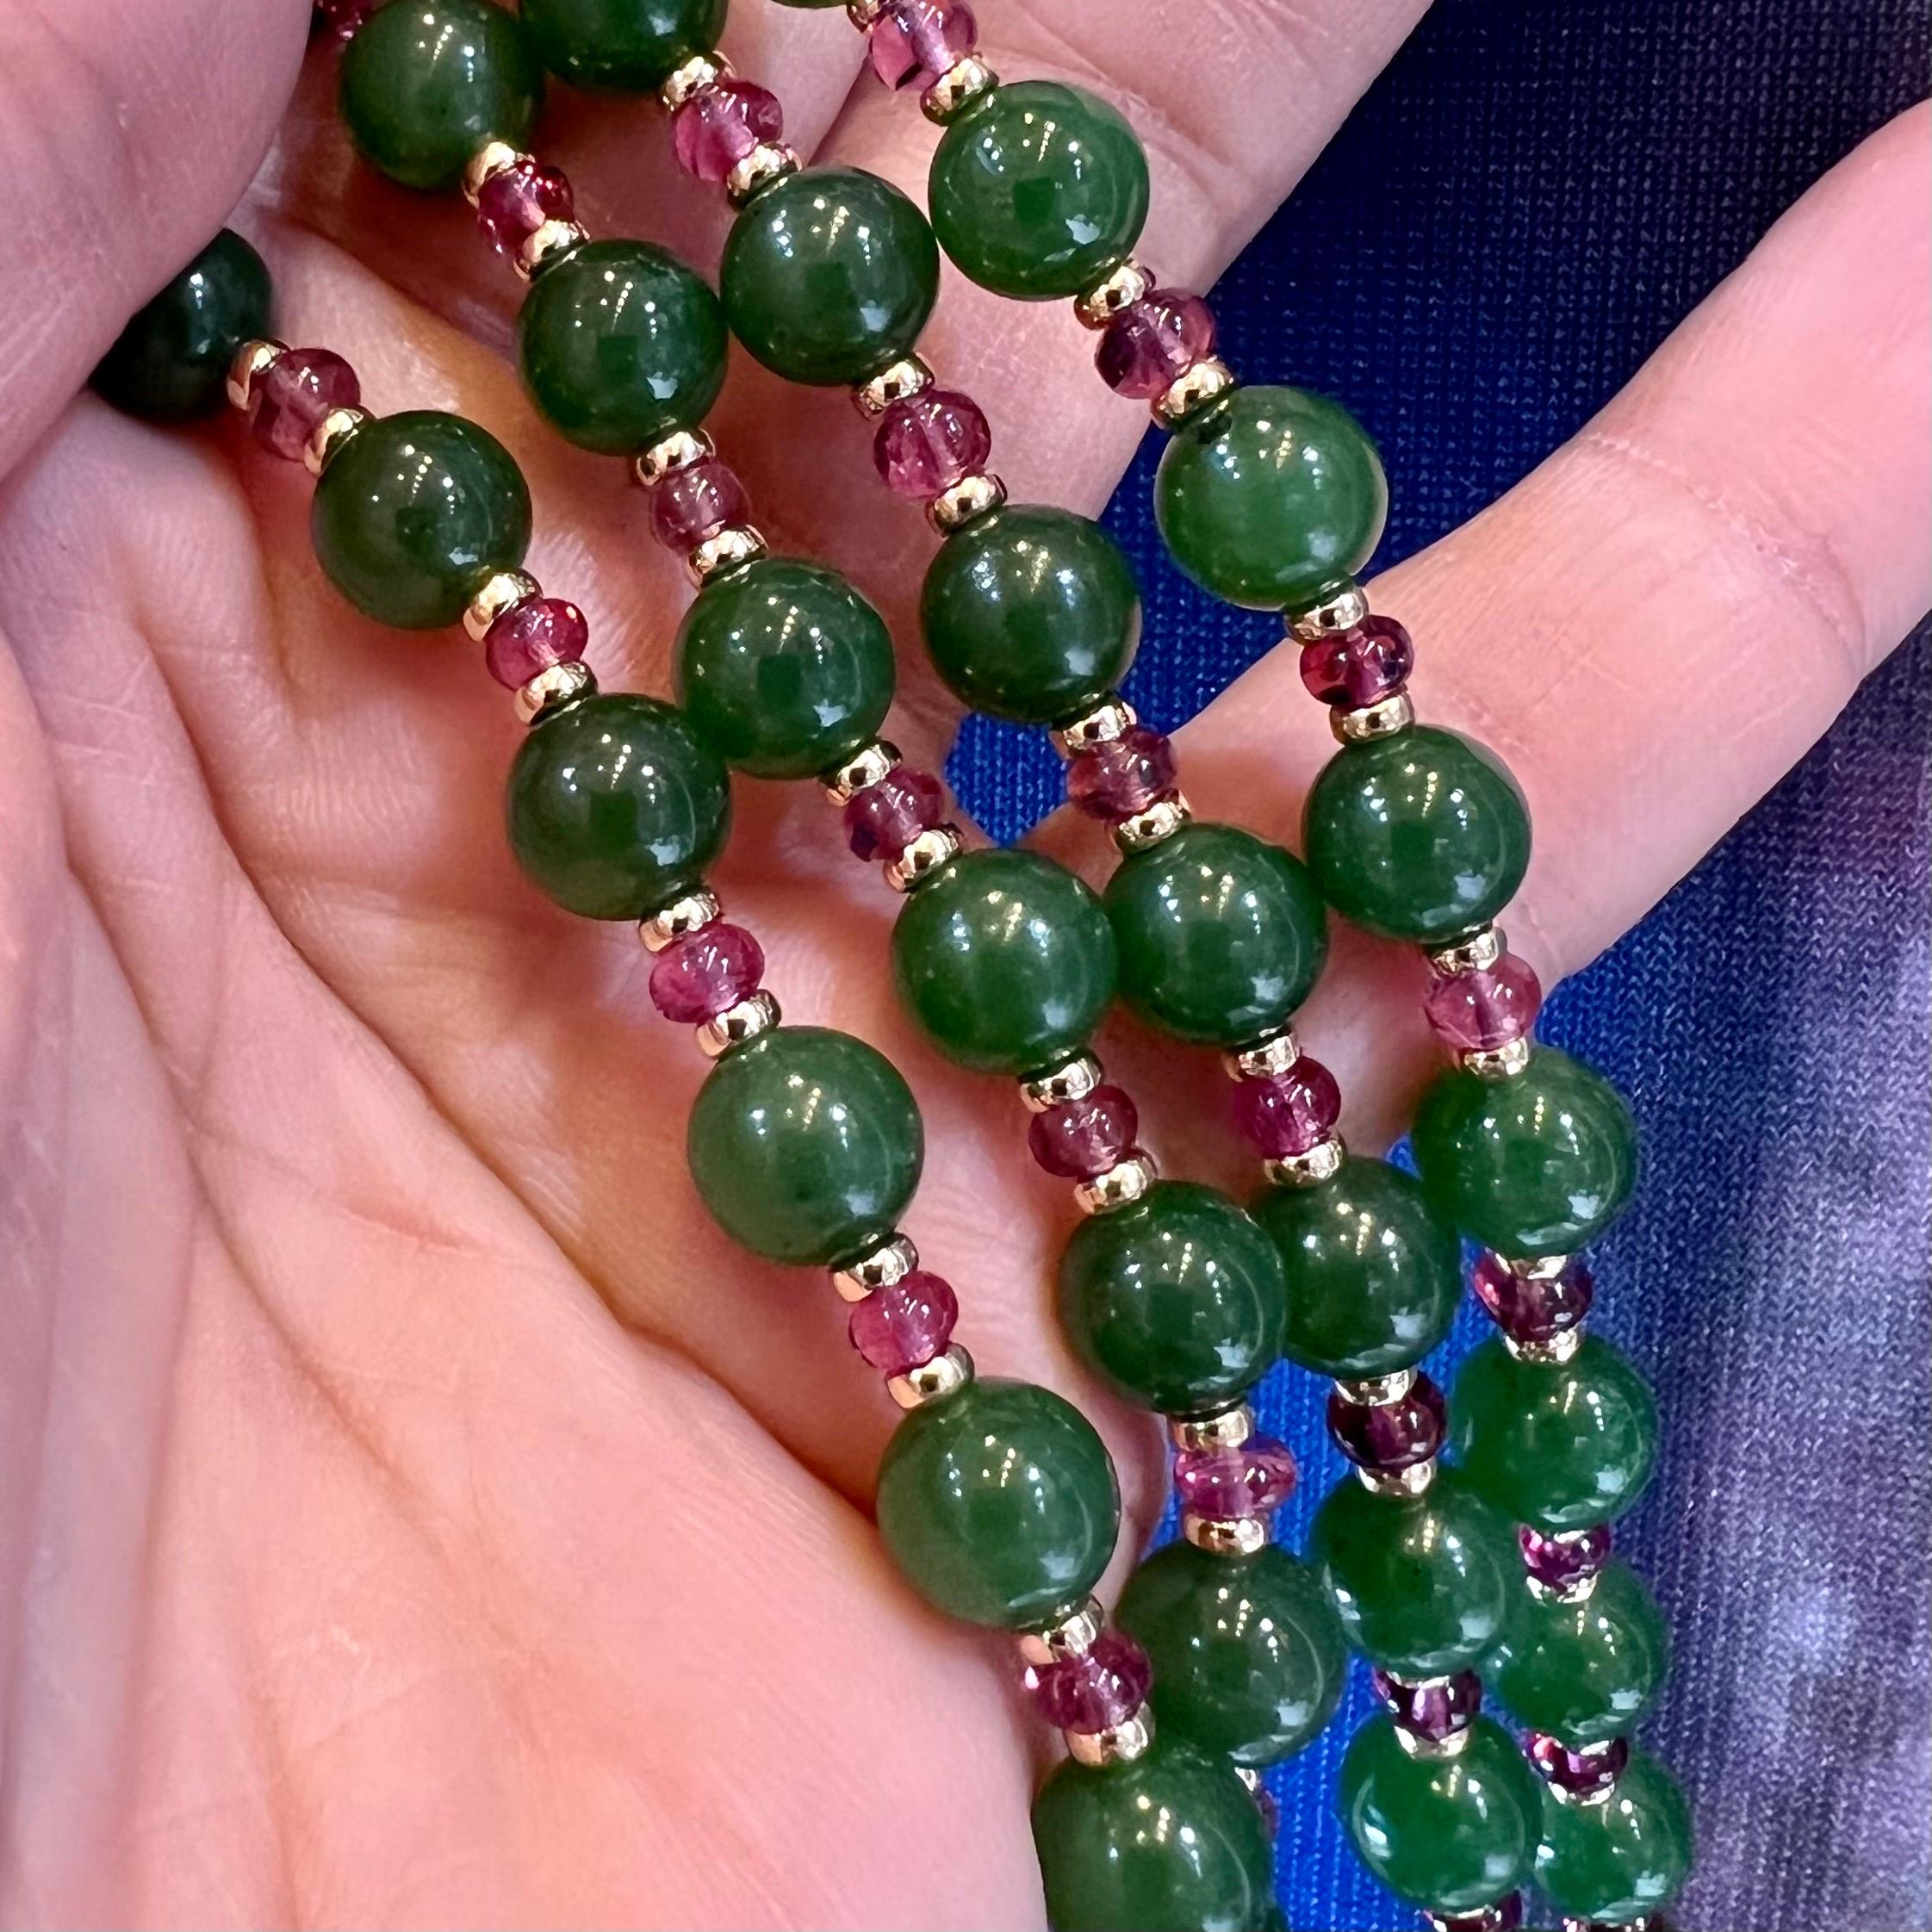 Created in 18 karat yellow gold
Jade beads 280 carats approx.
Pink tourmaline beads 27 carats approx.
18kyg roundels
36 inch length
Hook and eye clasp
Limited edition

Handcrafted from 18 karat yellow gold, featuring a sumptuous array of jade beads